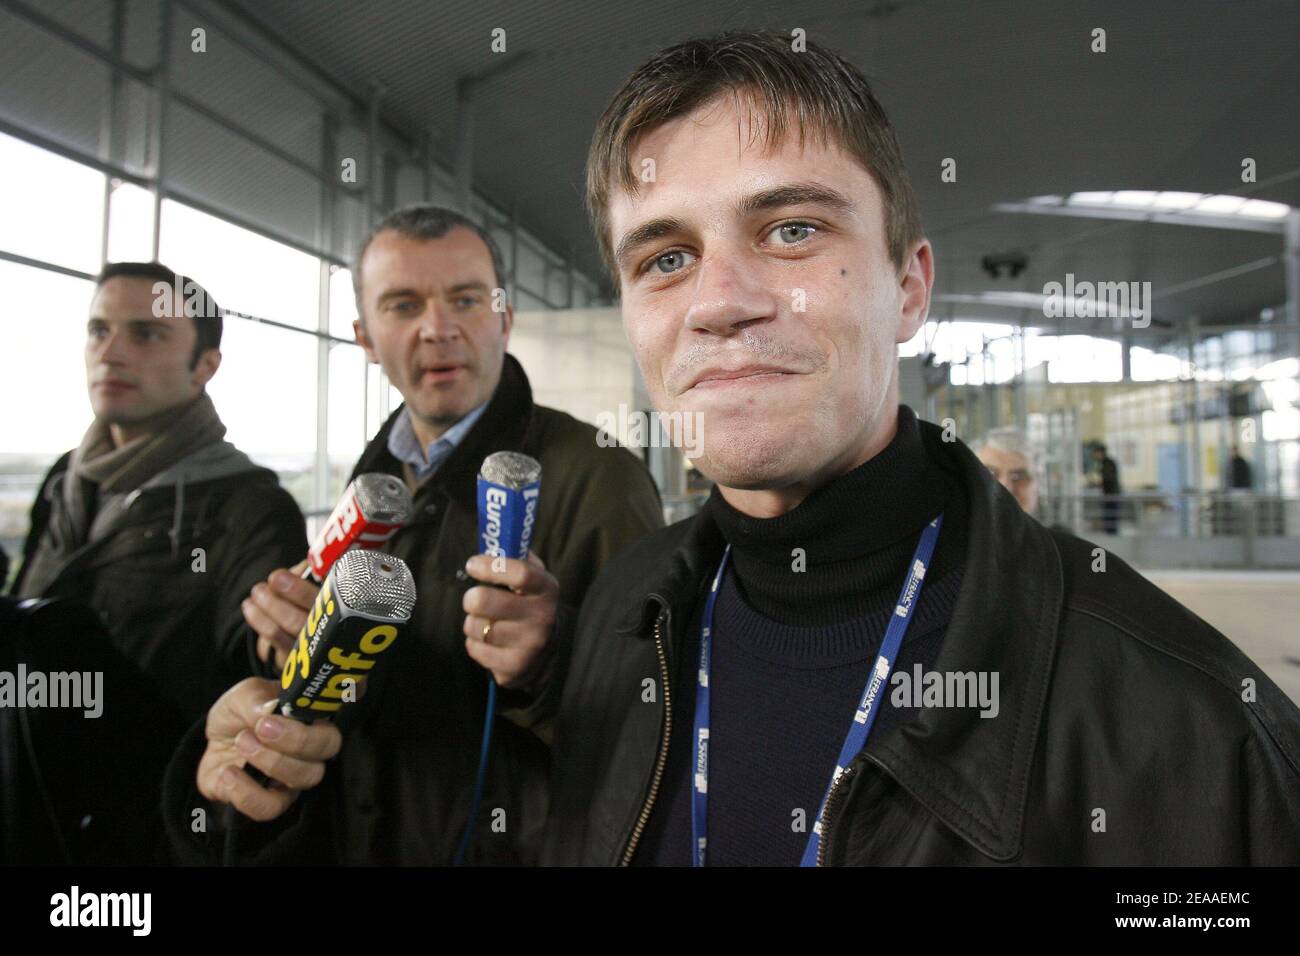 Daniel Legrand, who has been acquited on appeals court in Outreau trial,  arrives to Calais rail station, France, on December 2, 2005. Photo by Mehdi  Taamallah/ABACAPRESS.COM Stock Photo - Alamy